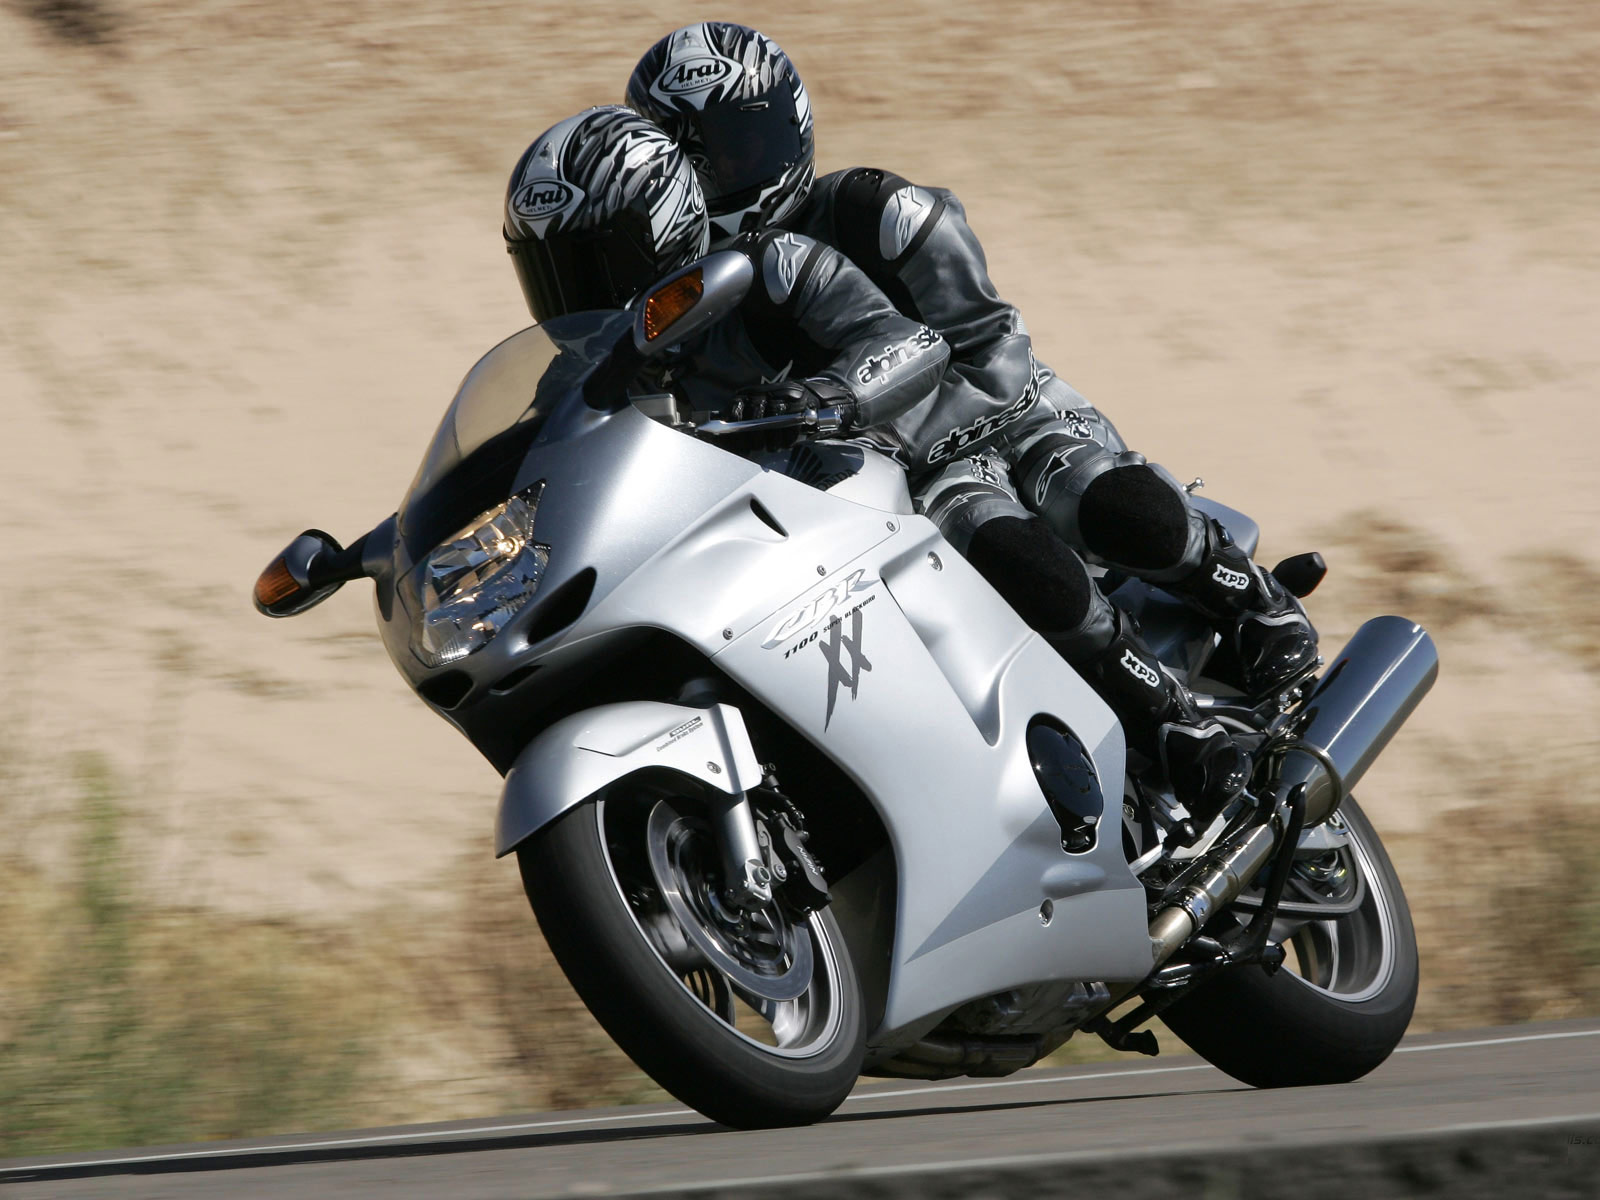 Motorcycle photos, specifications review, insurance, lawyers